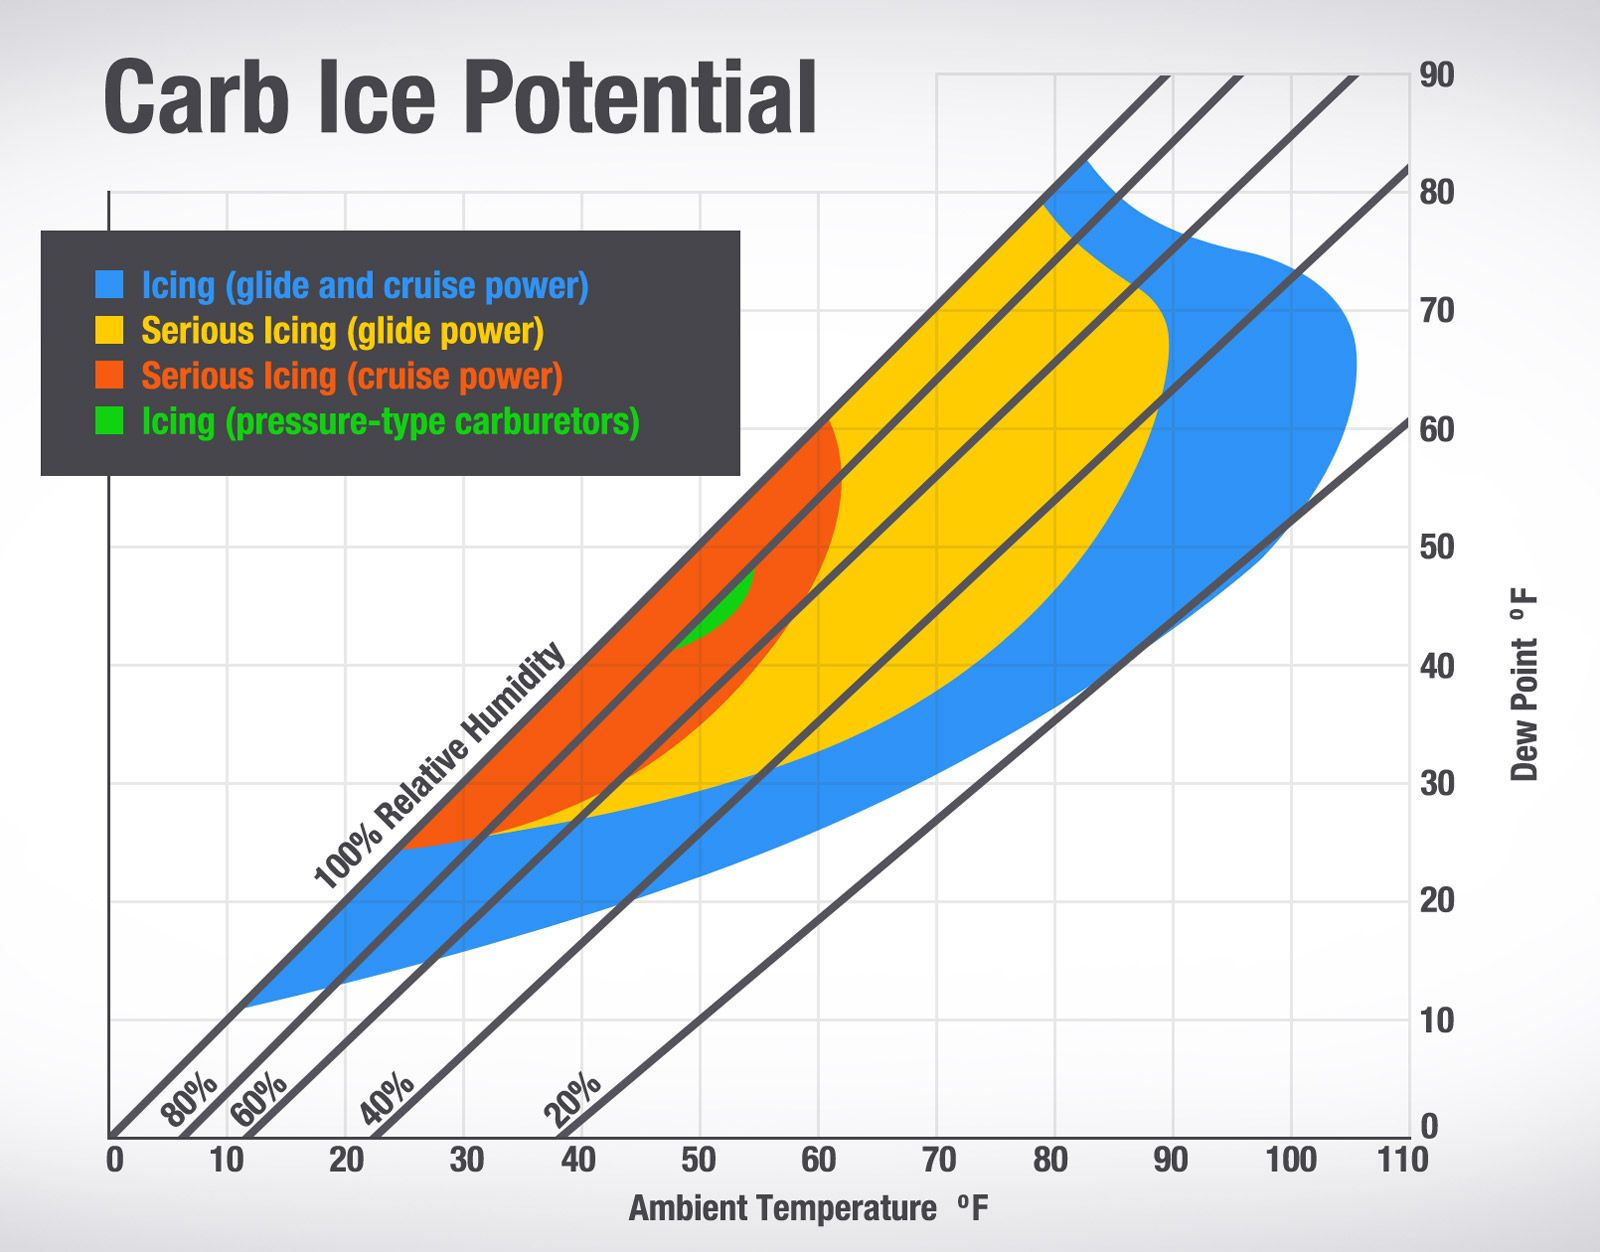 carb-ice-potential-chart2.jpg